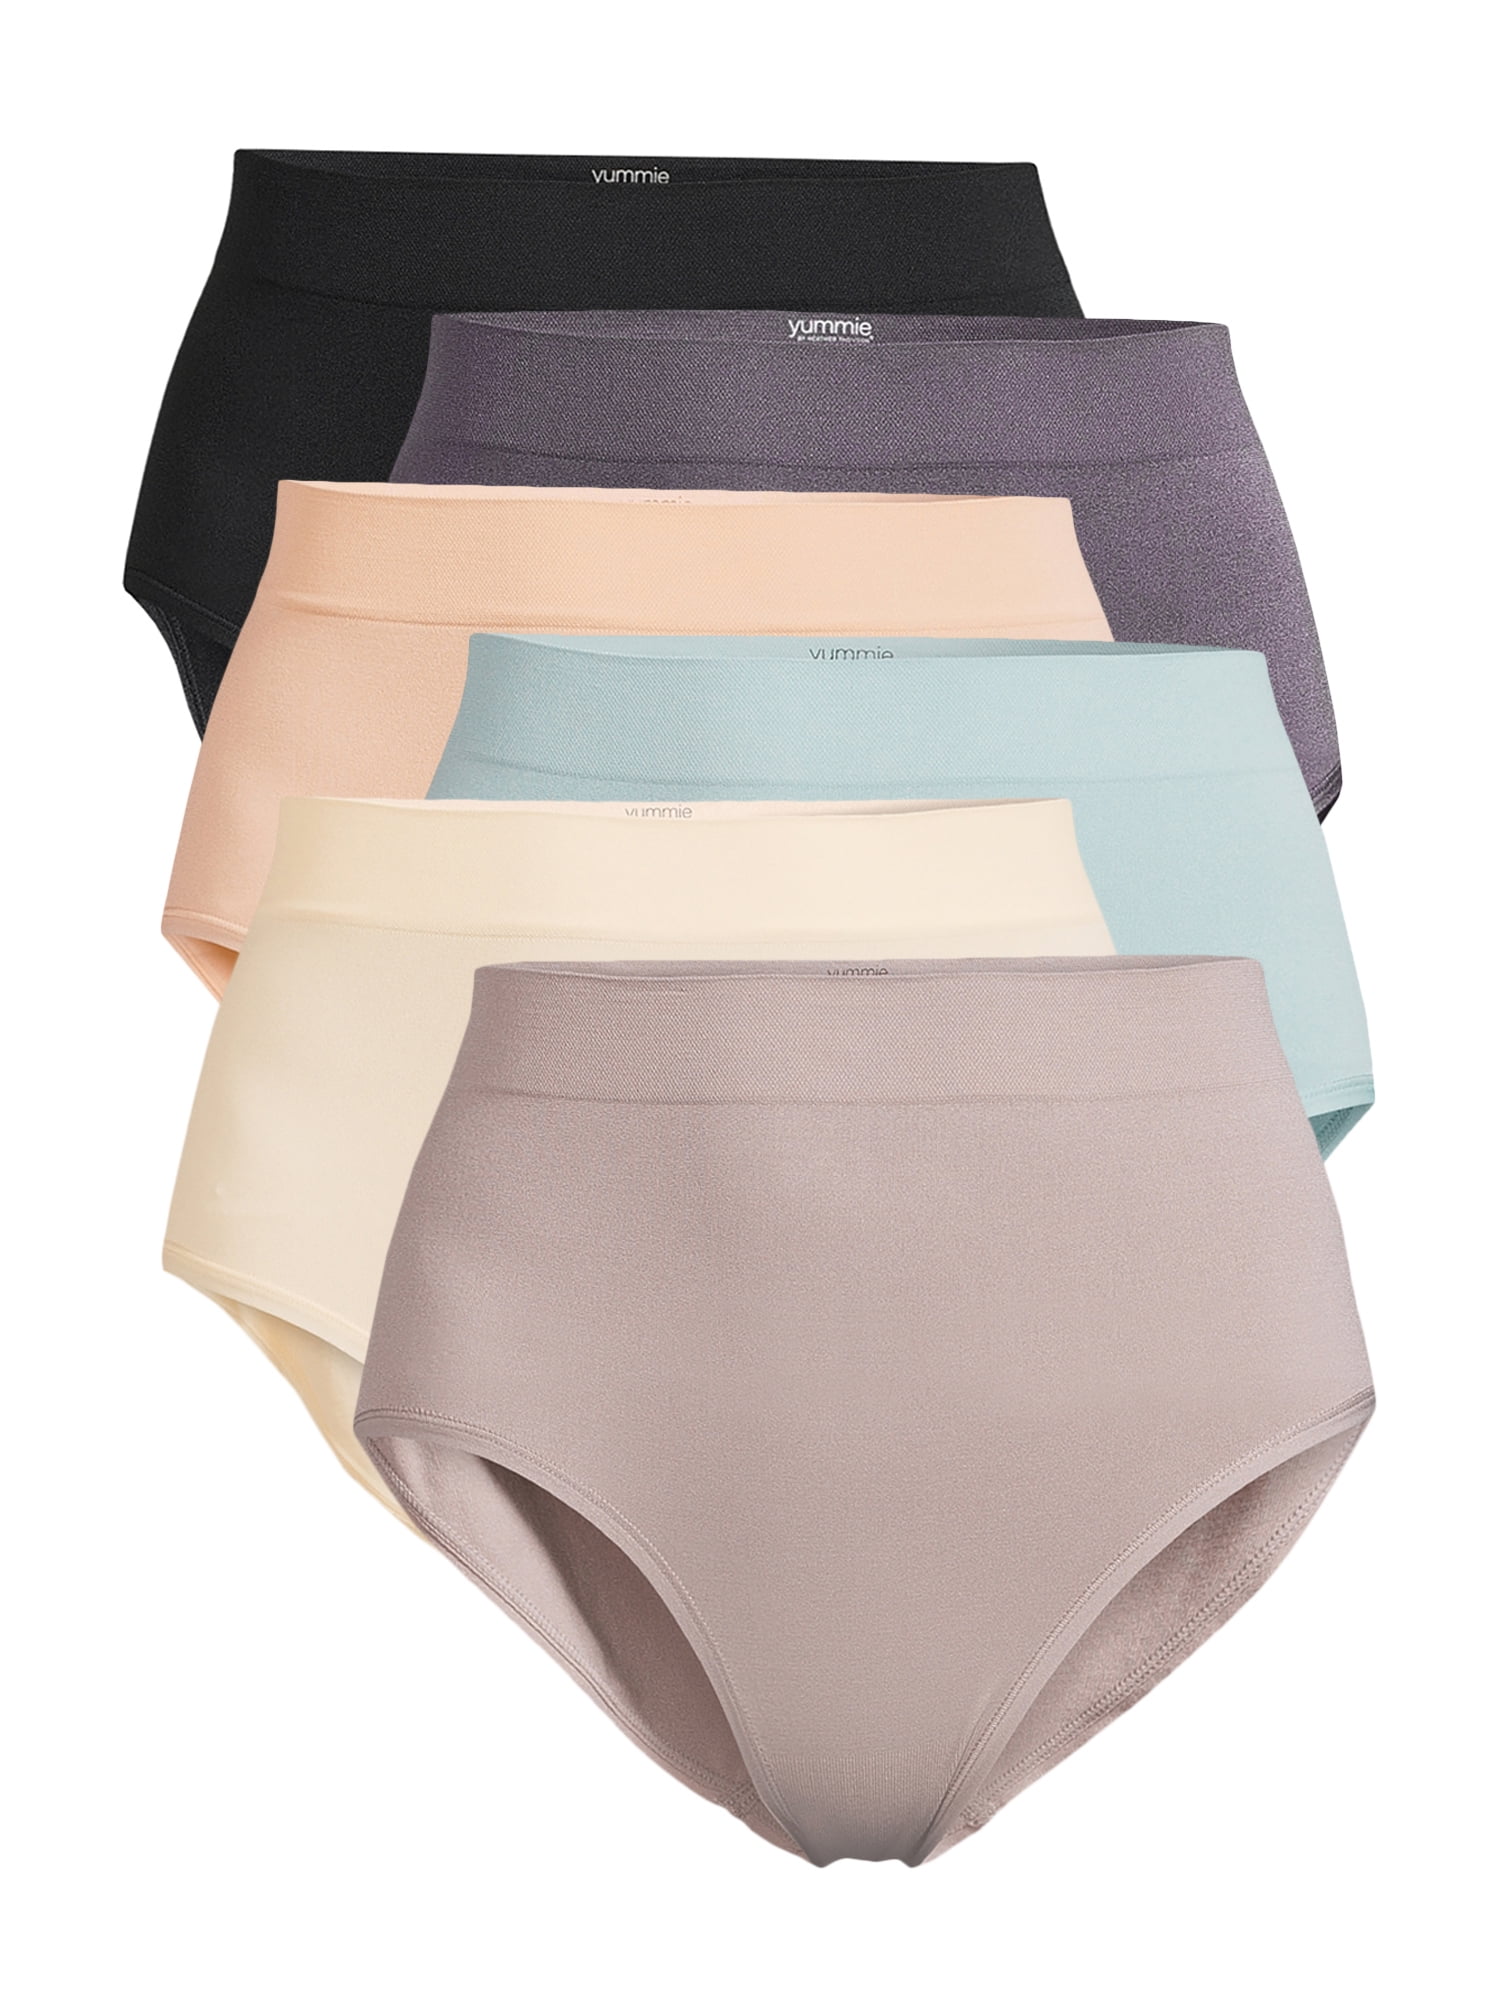 Yummie by Heather Thomson Women's Seamless Brief Panties, 6 Pack